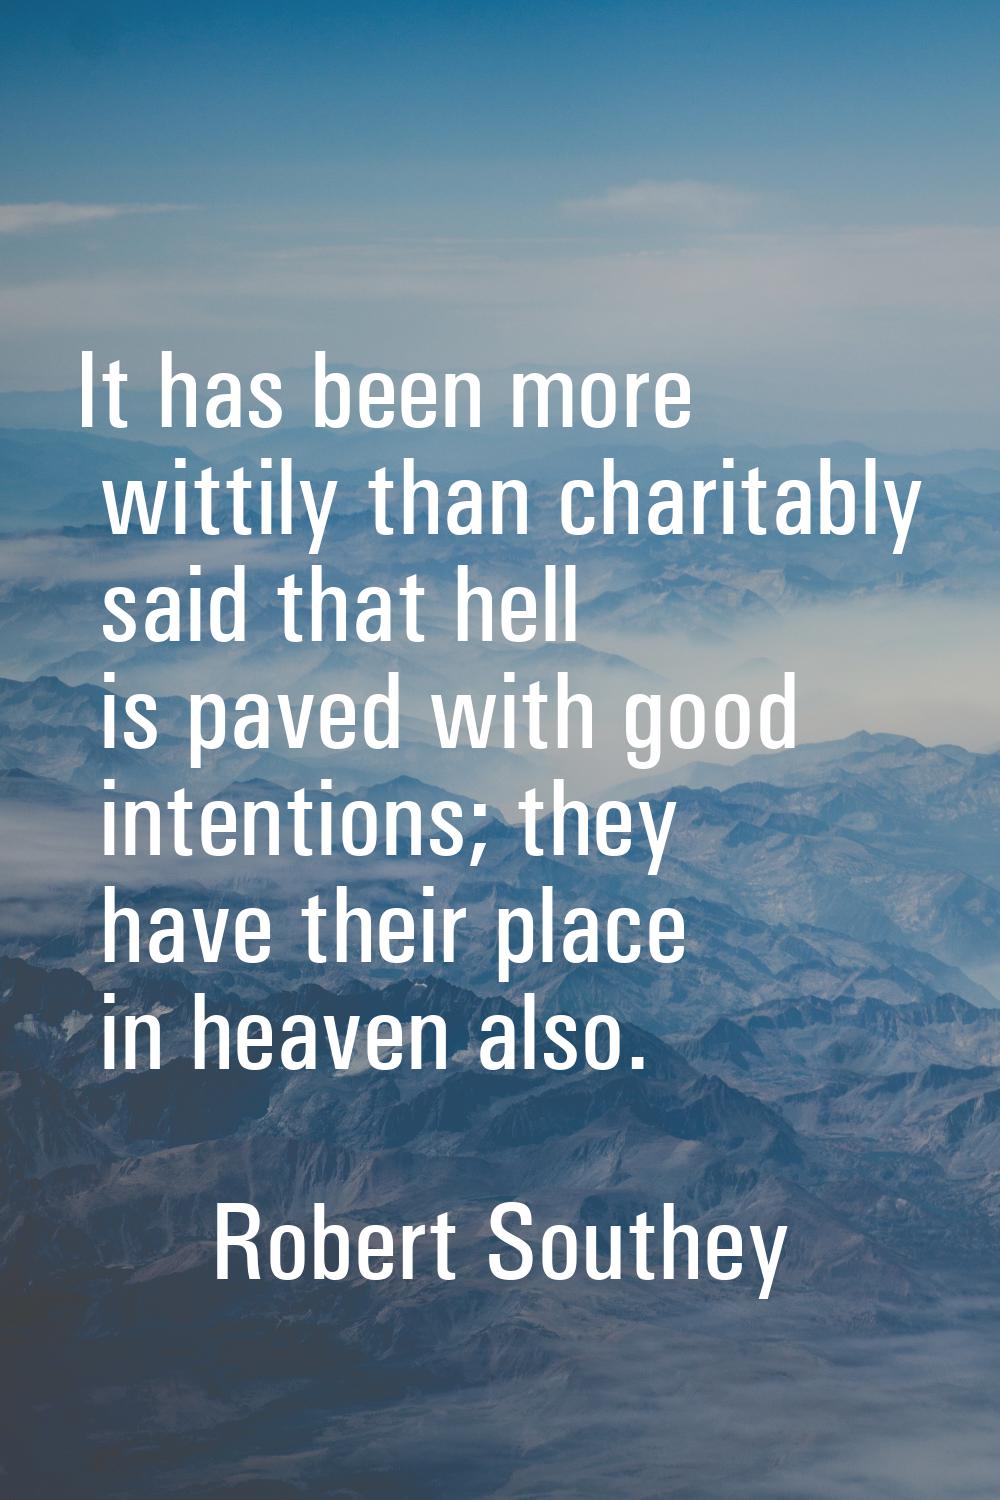 It has been more wittily than charitably said that hell is paved with good intentions; they have th